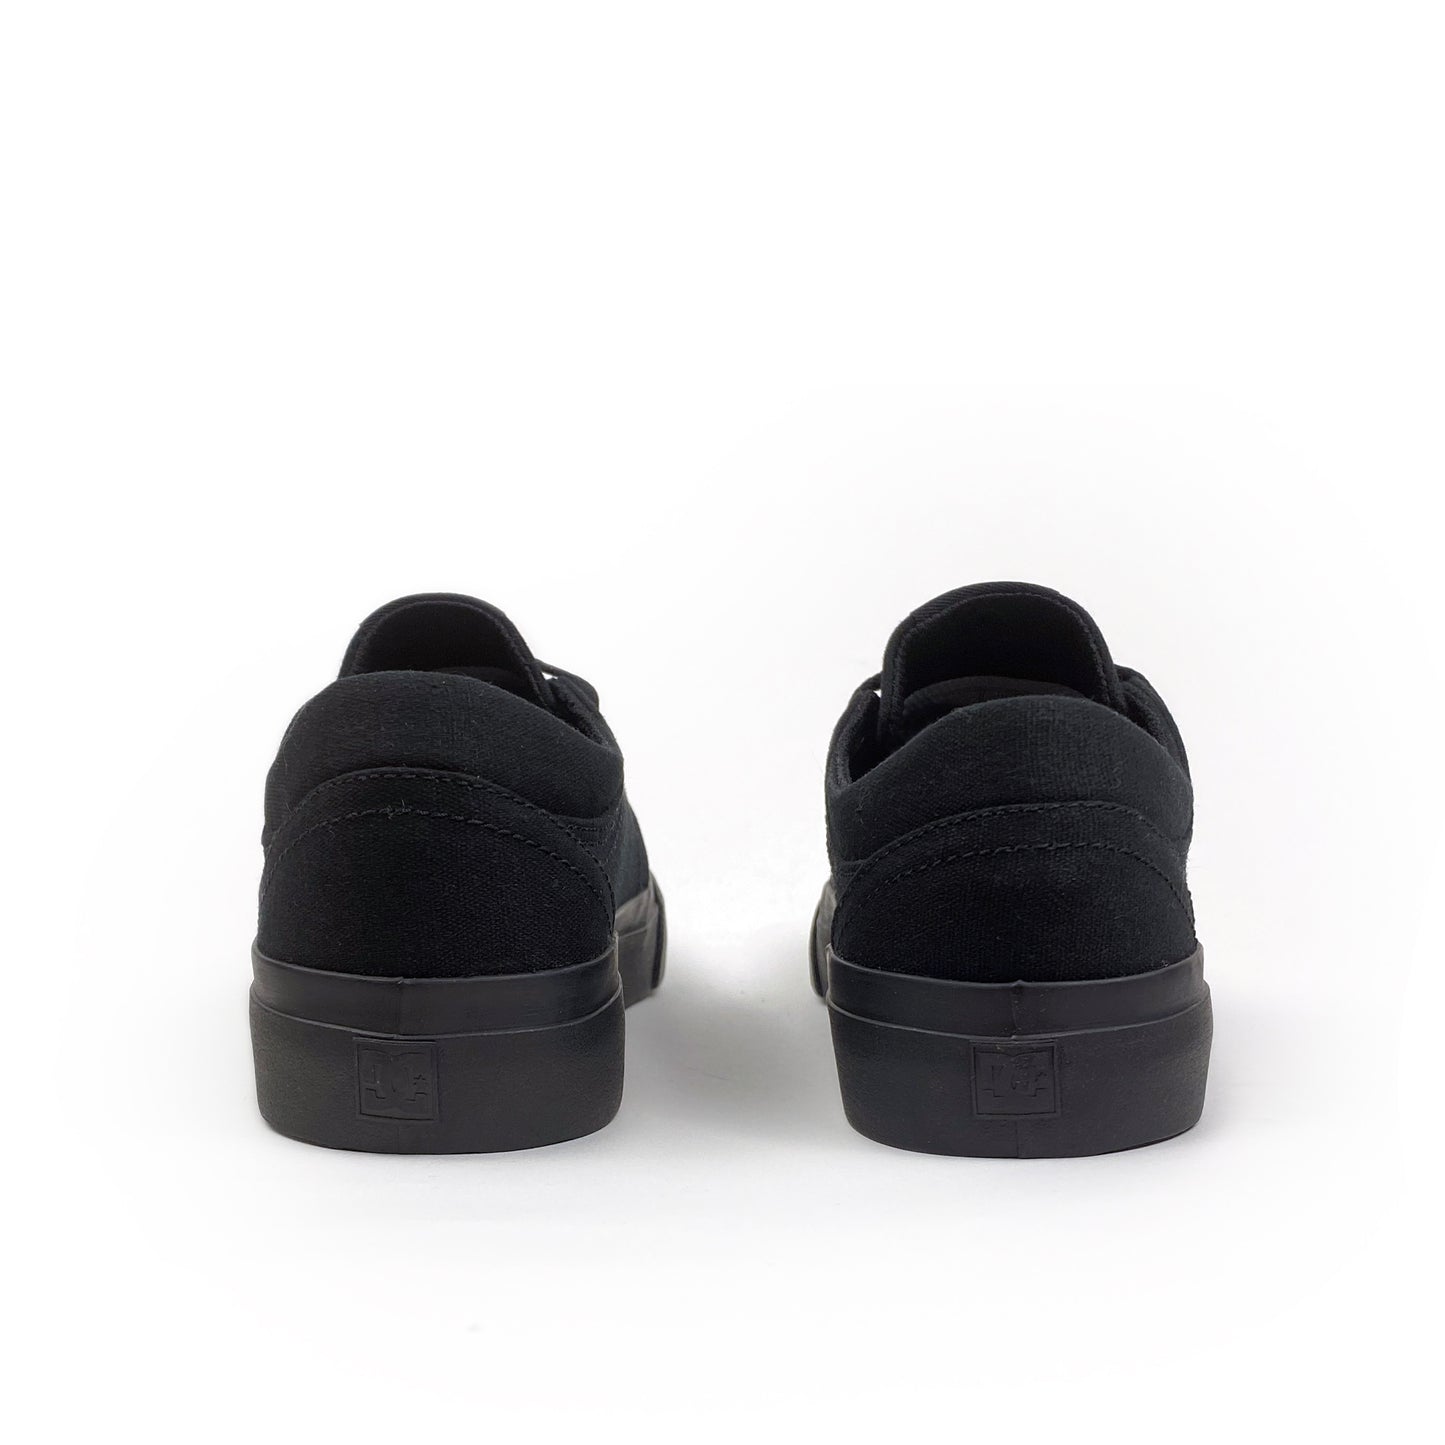 DC Trase TX Youth Shoes - Black / Black - Prime Delux Store